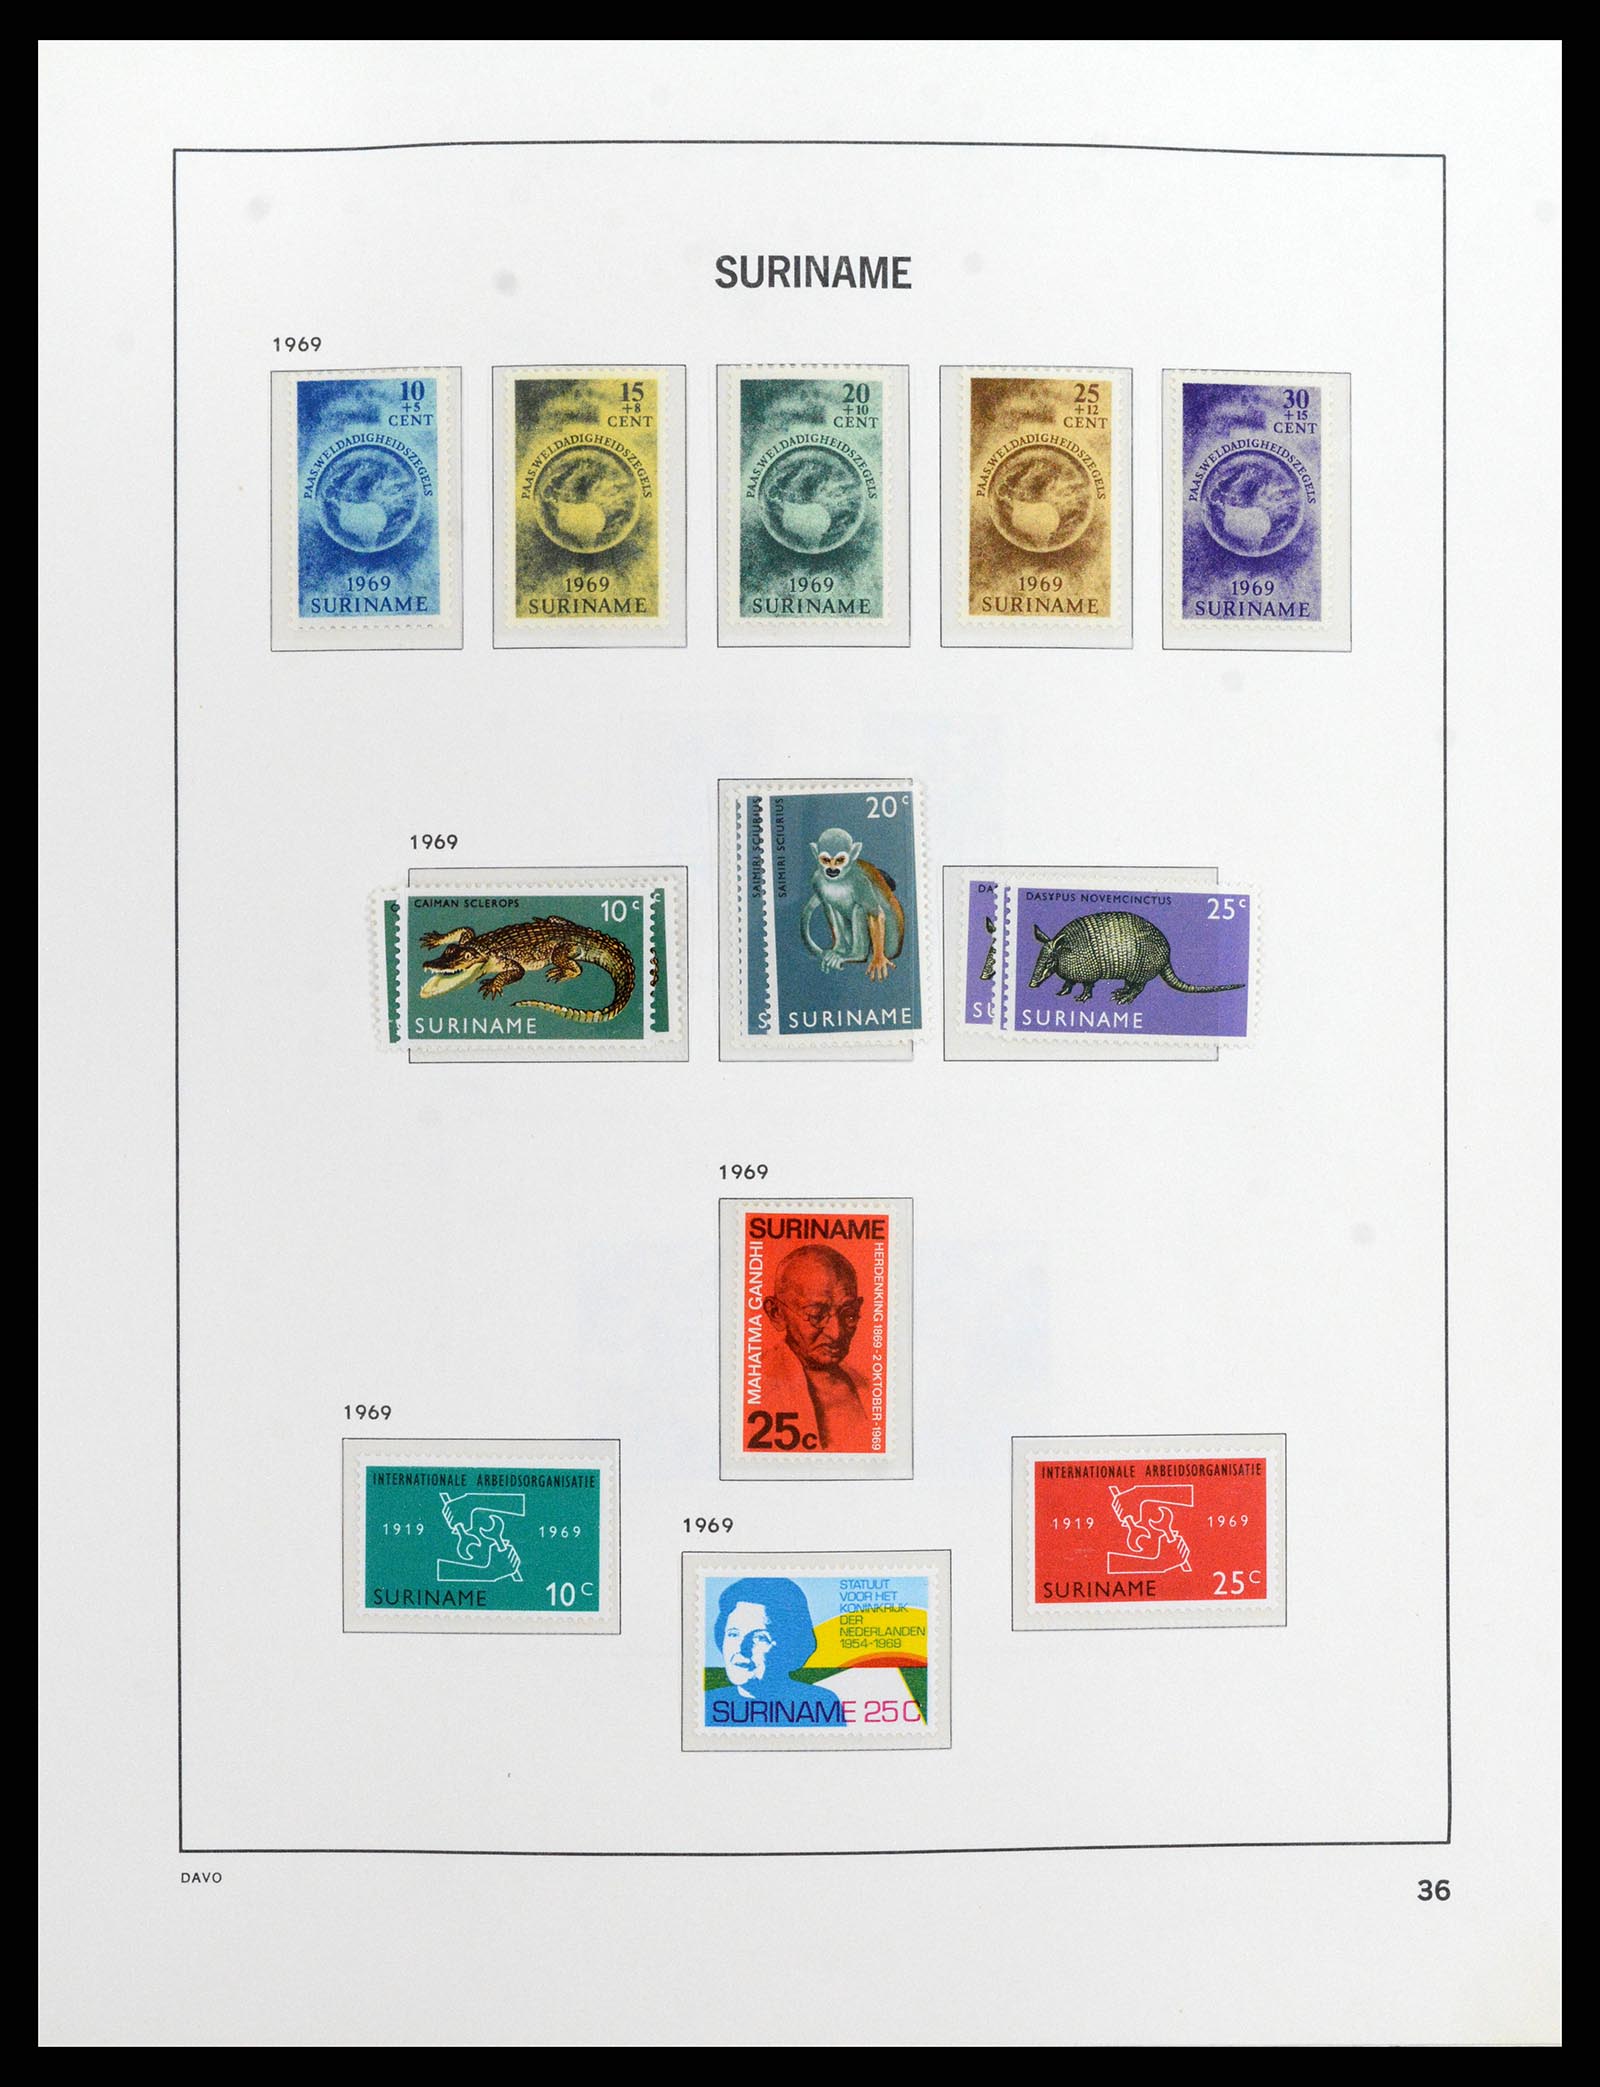 37843 040 - Stamp Collection 37843 Suriname 1873-2008.